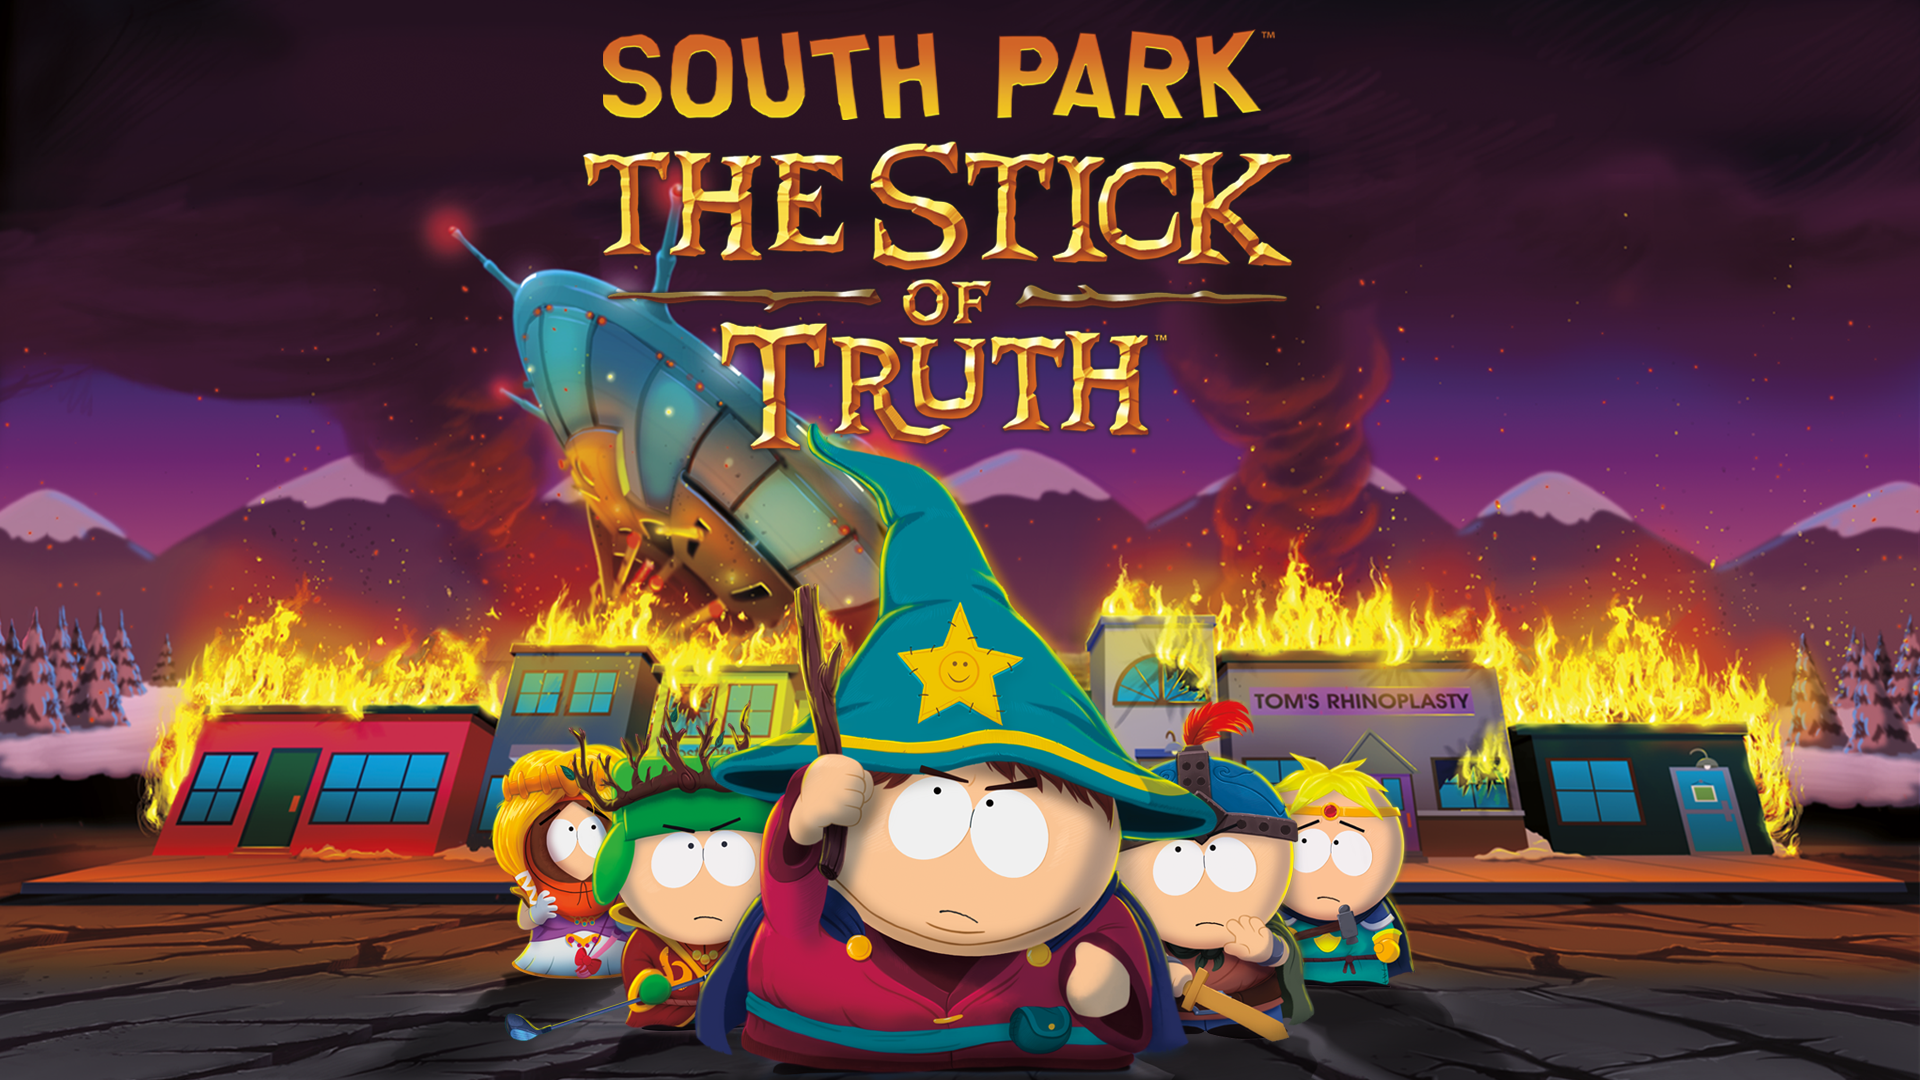 South Park: The Stick of Truth (English)